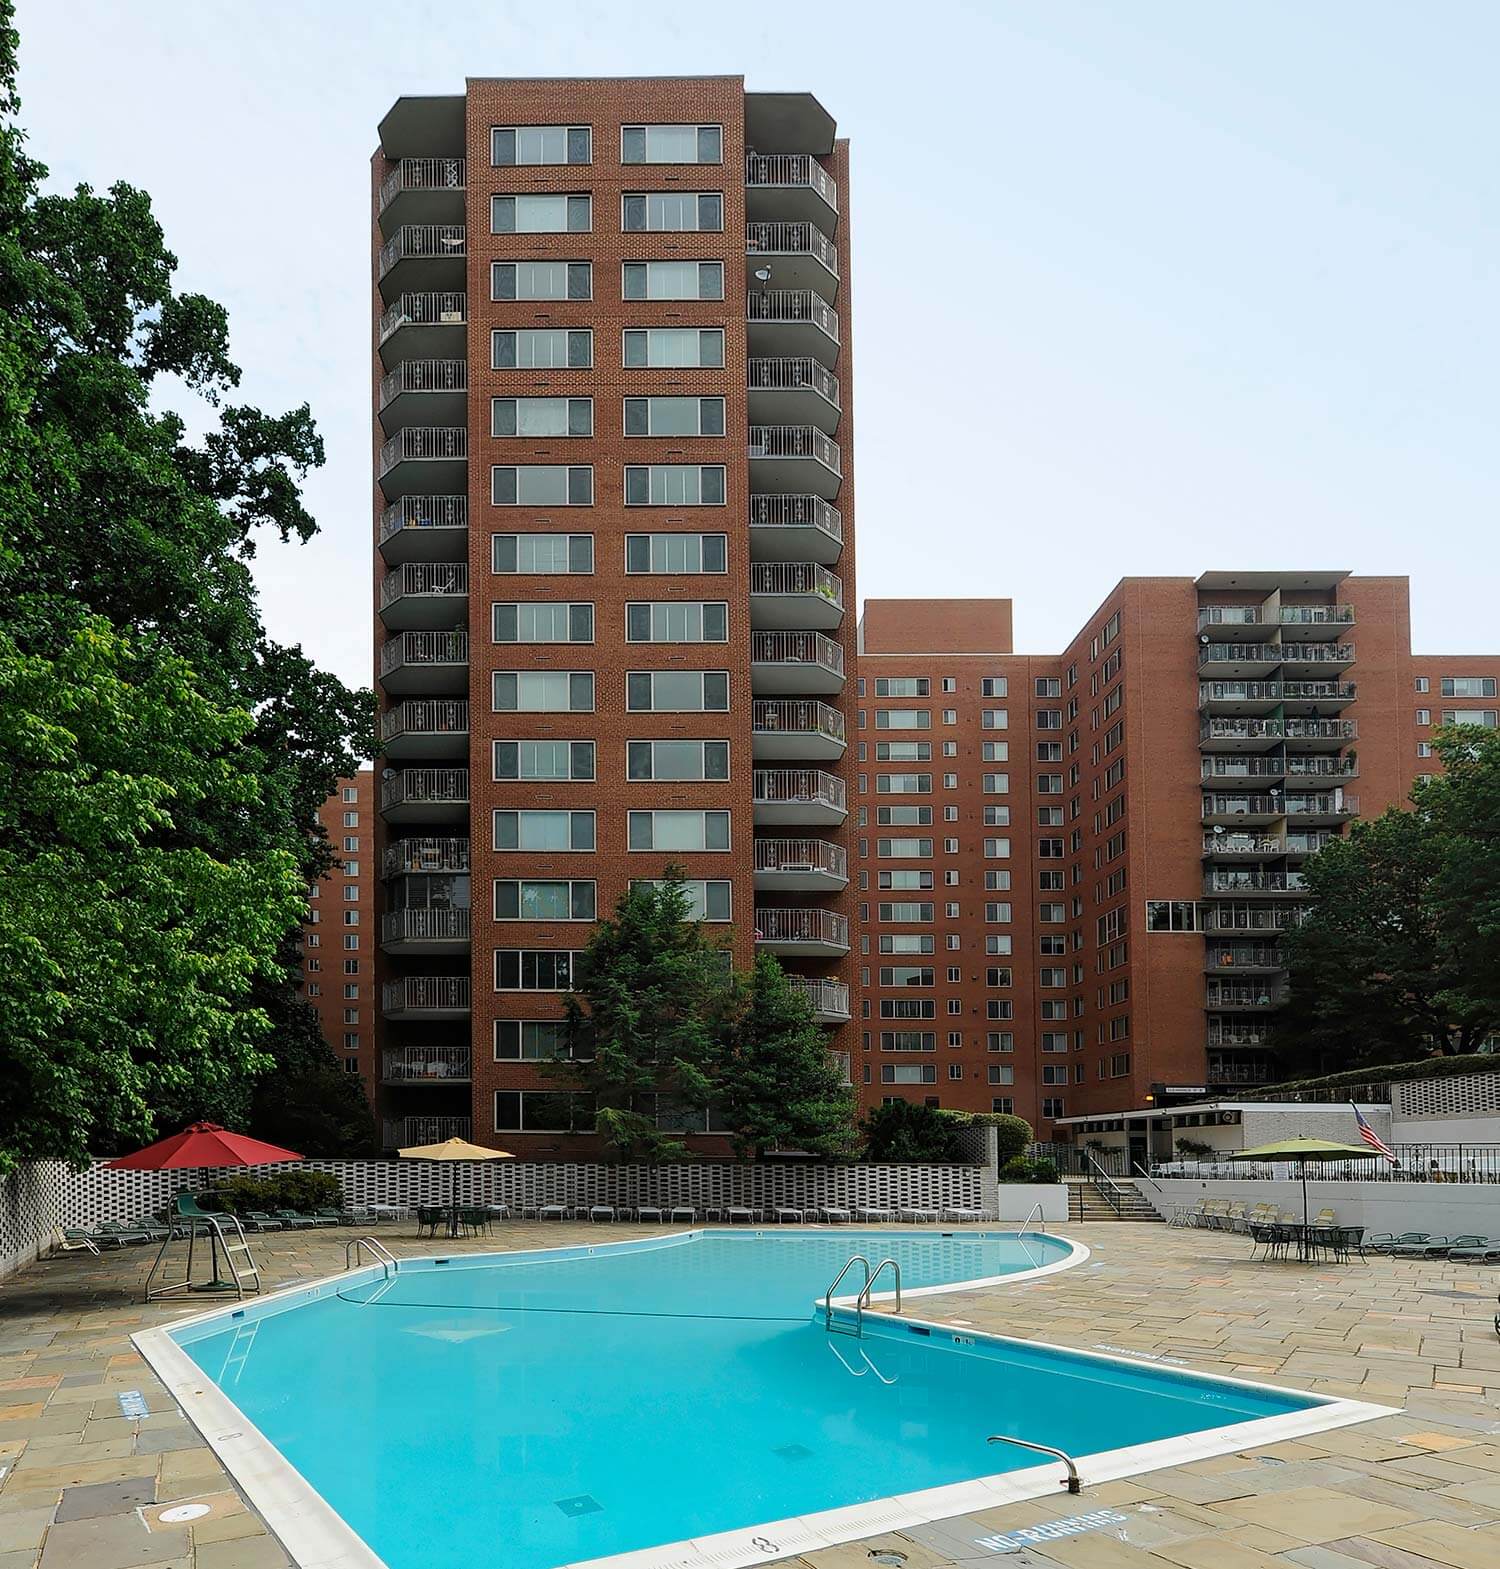 4000 Mass Ave Apartments pool